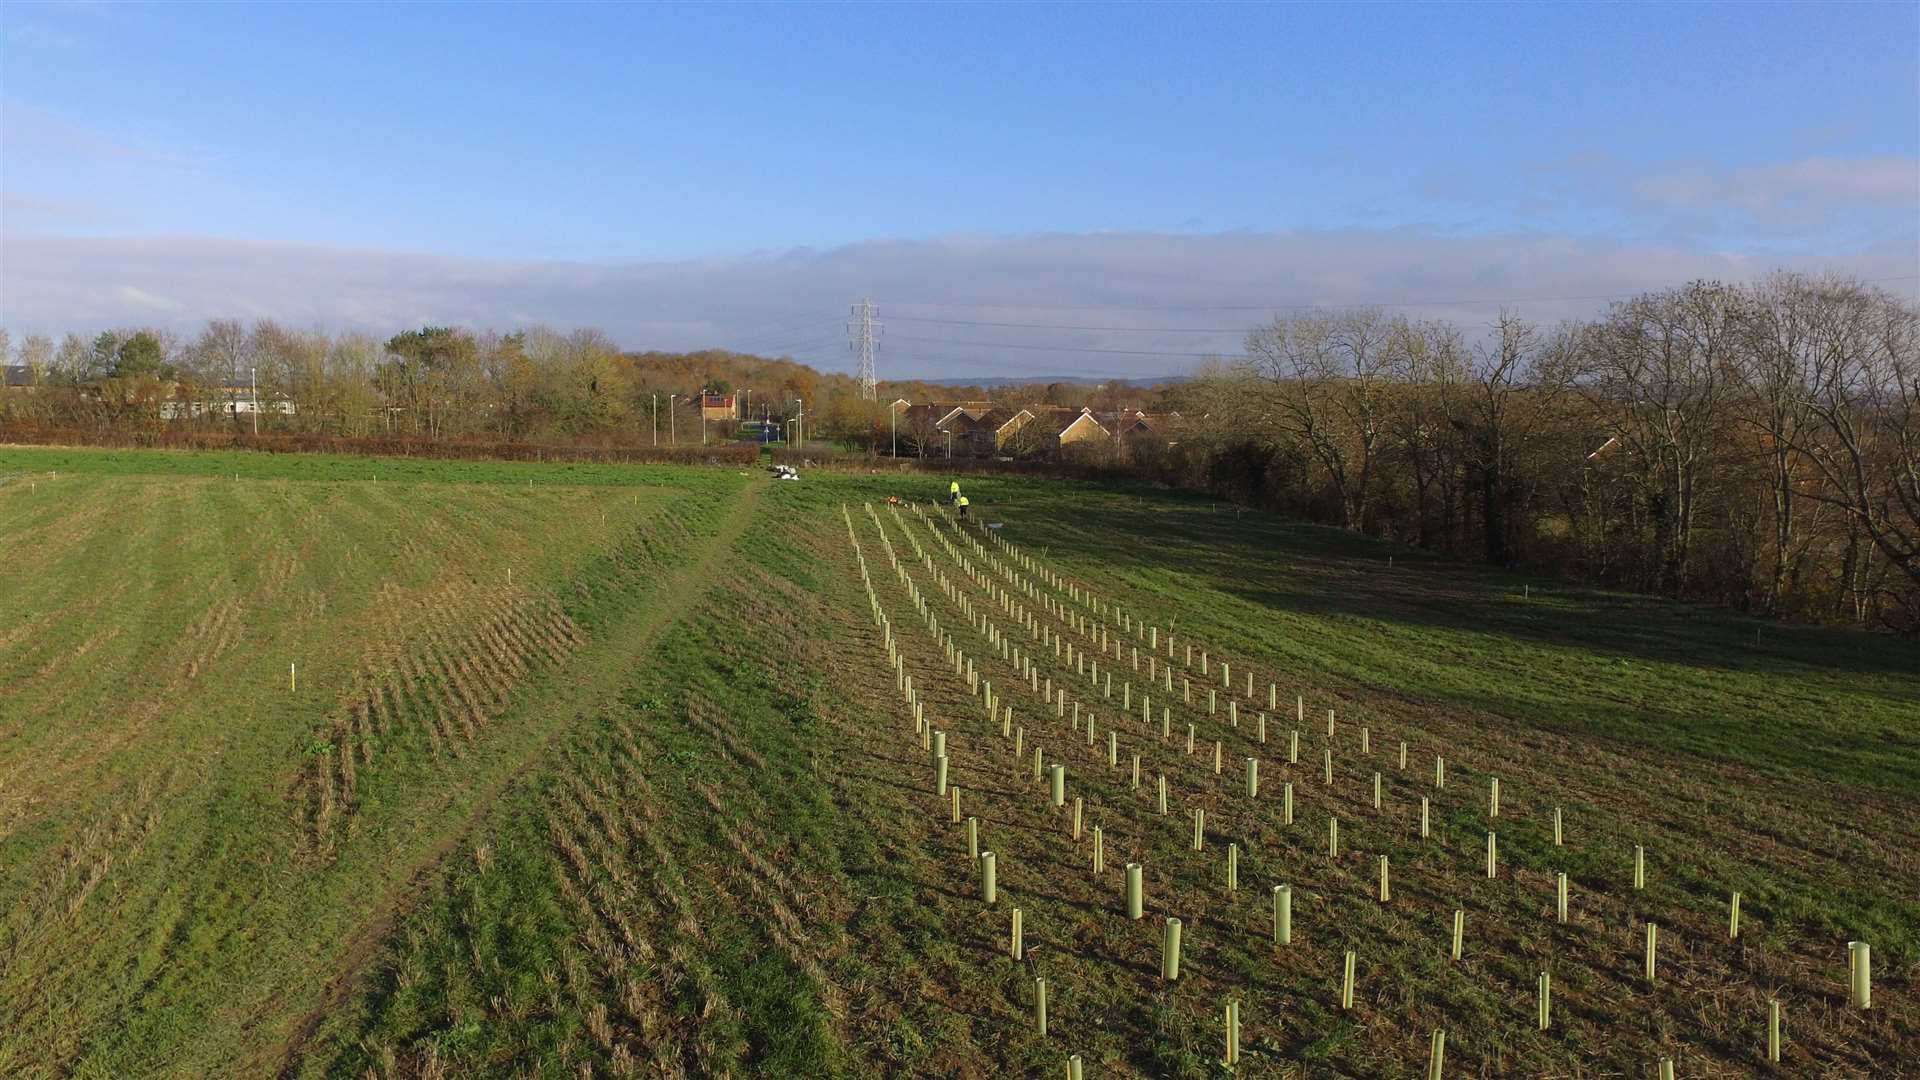 More than 1000,000 trees will be planted in the Ashford borough over the next three winters